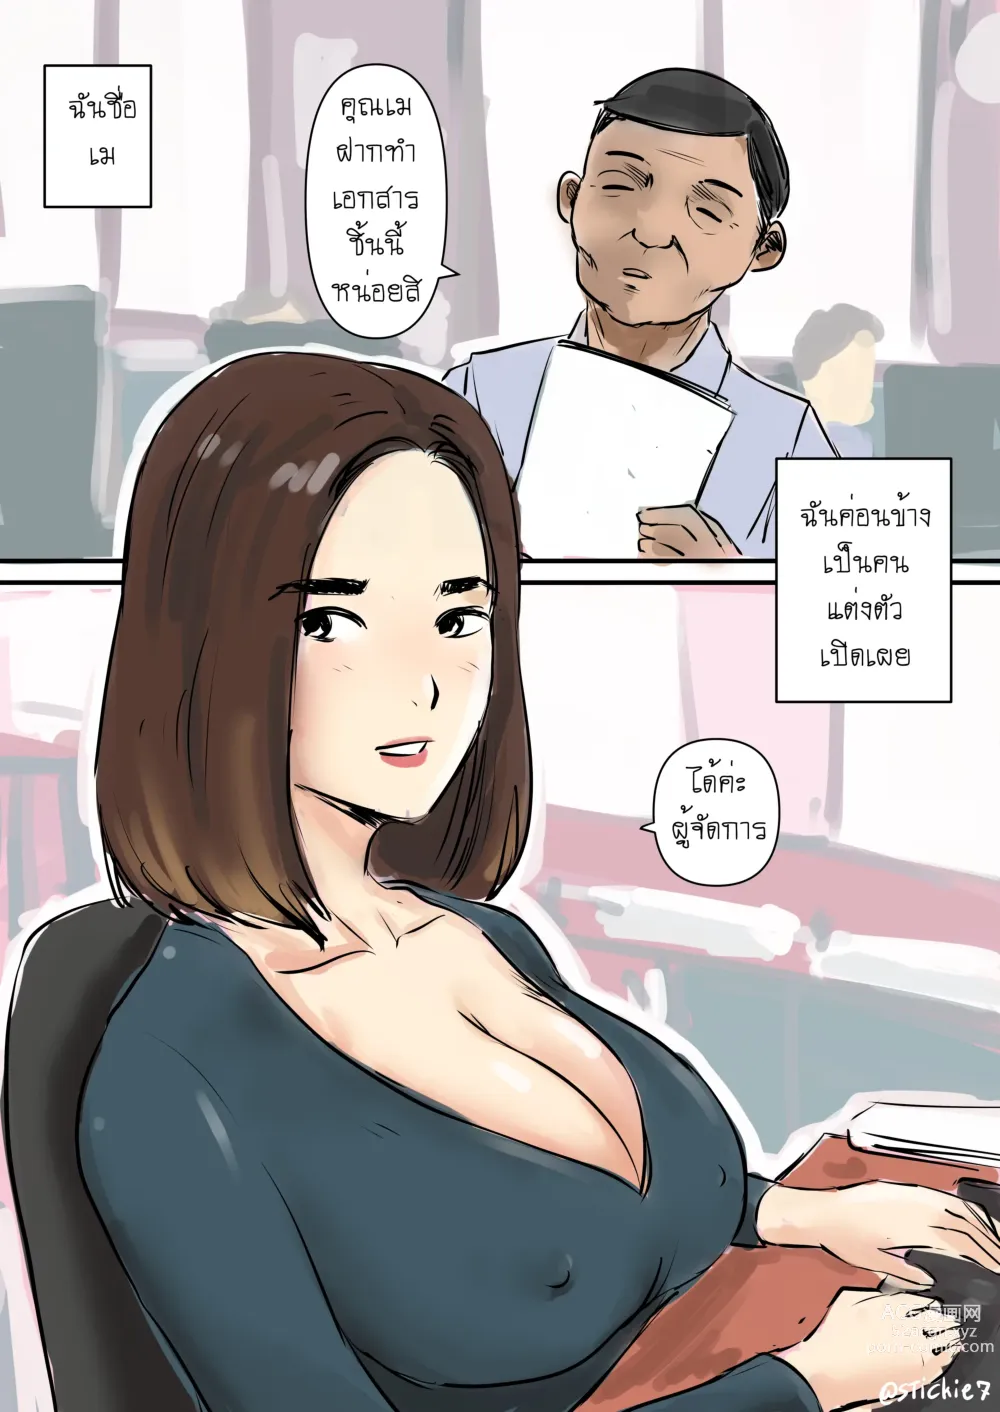 Page 3 of doujinshi My girlfriend is secretly lewd. แฟนผมแอบร่าน